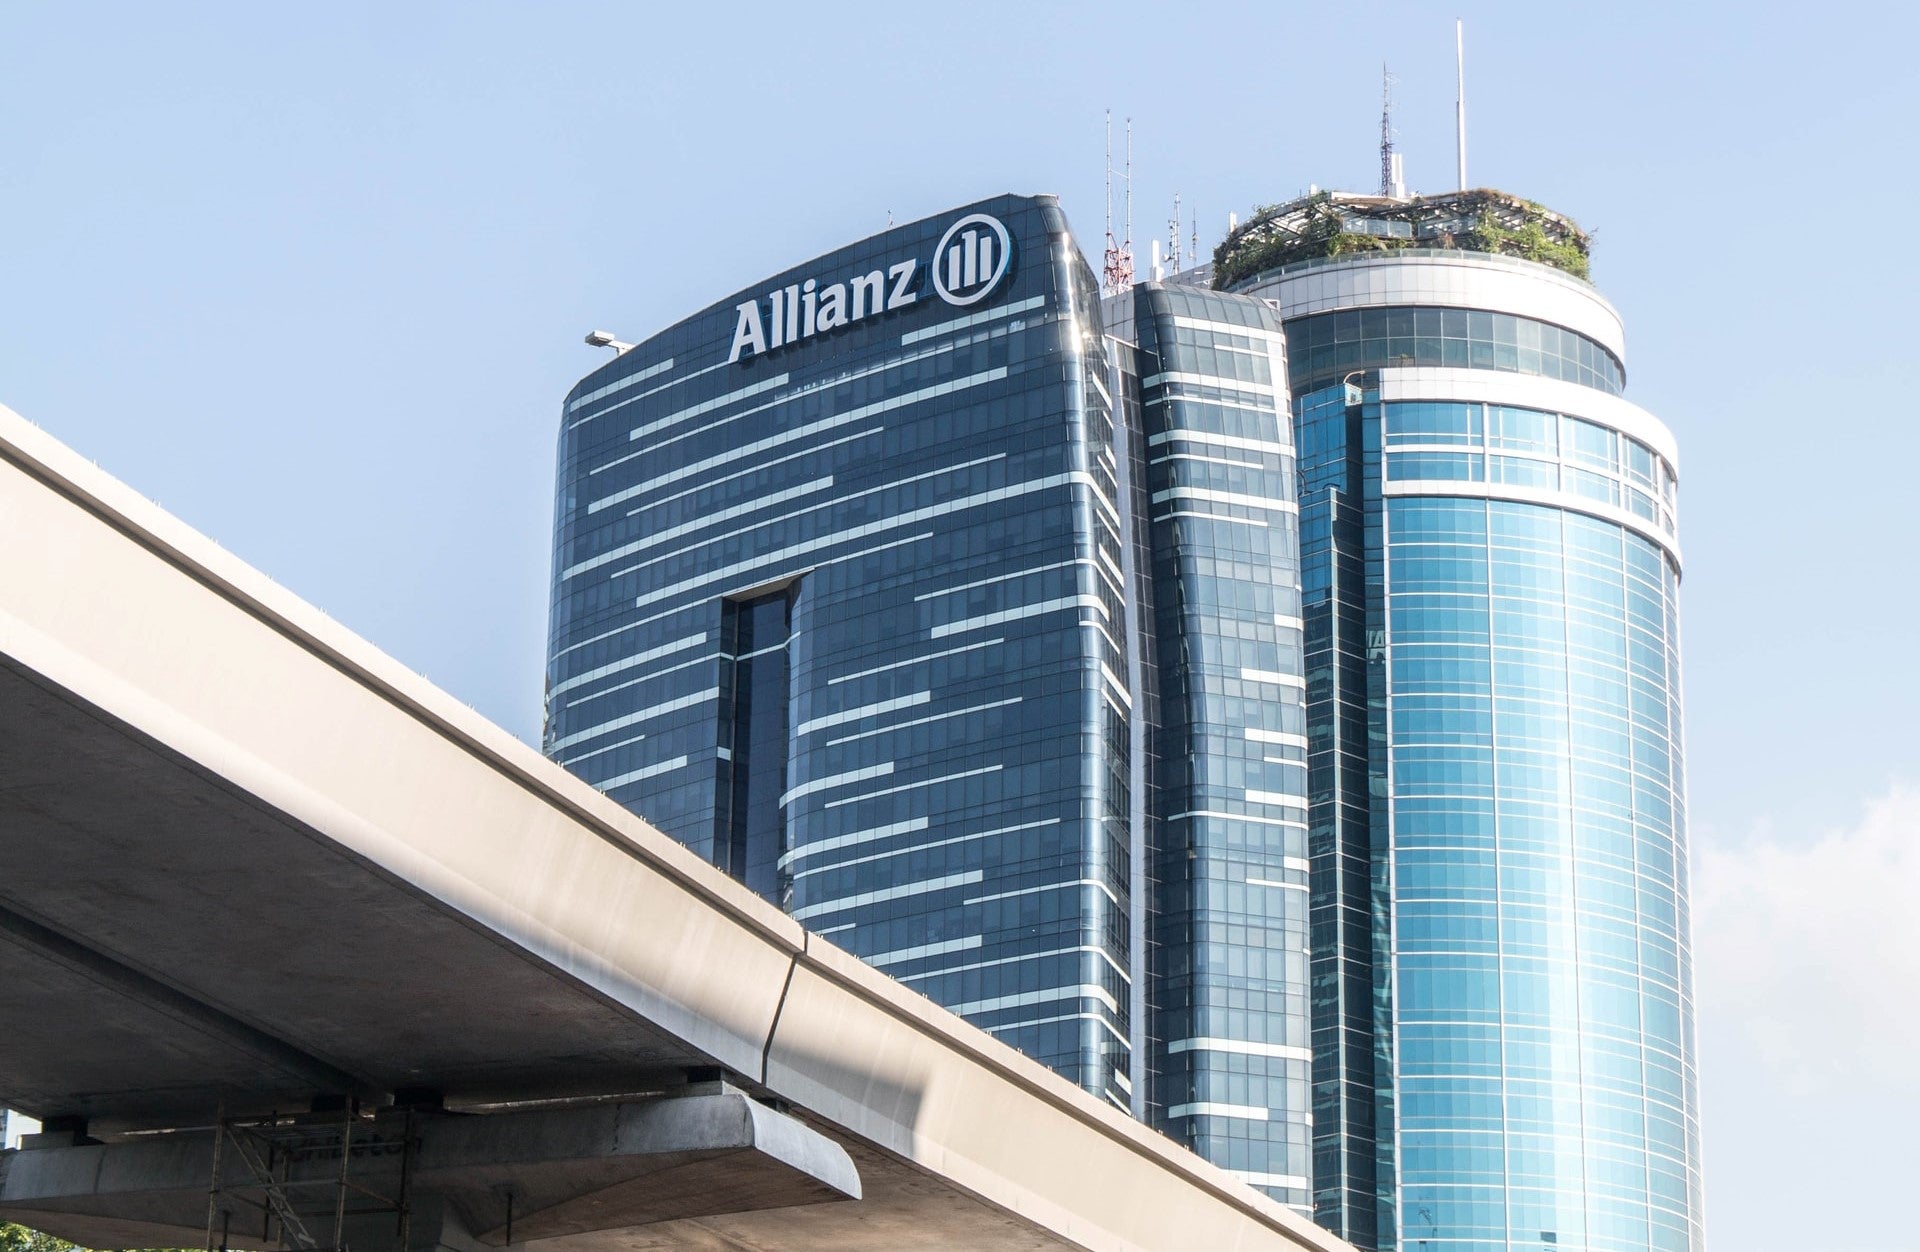 Allianz signs deal to sell majority stake in Russian operations